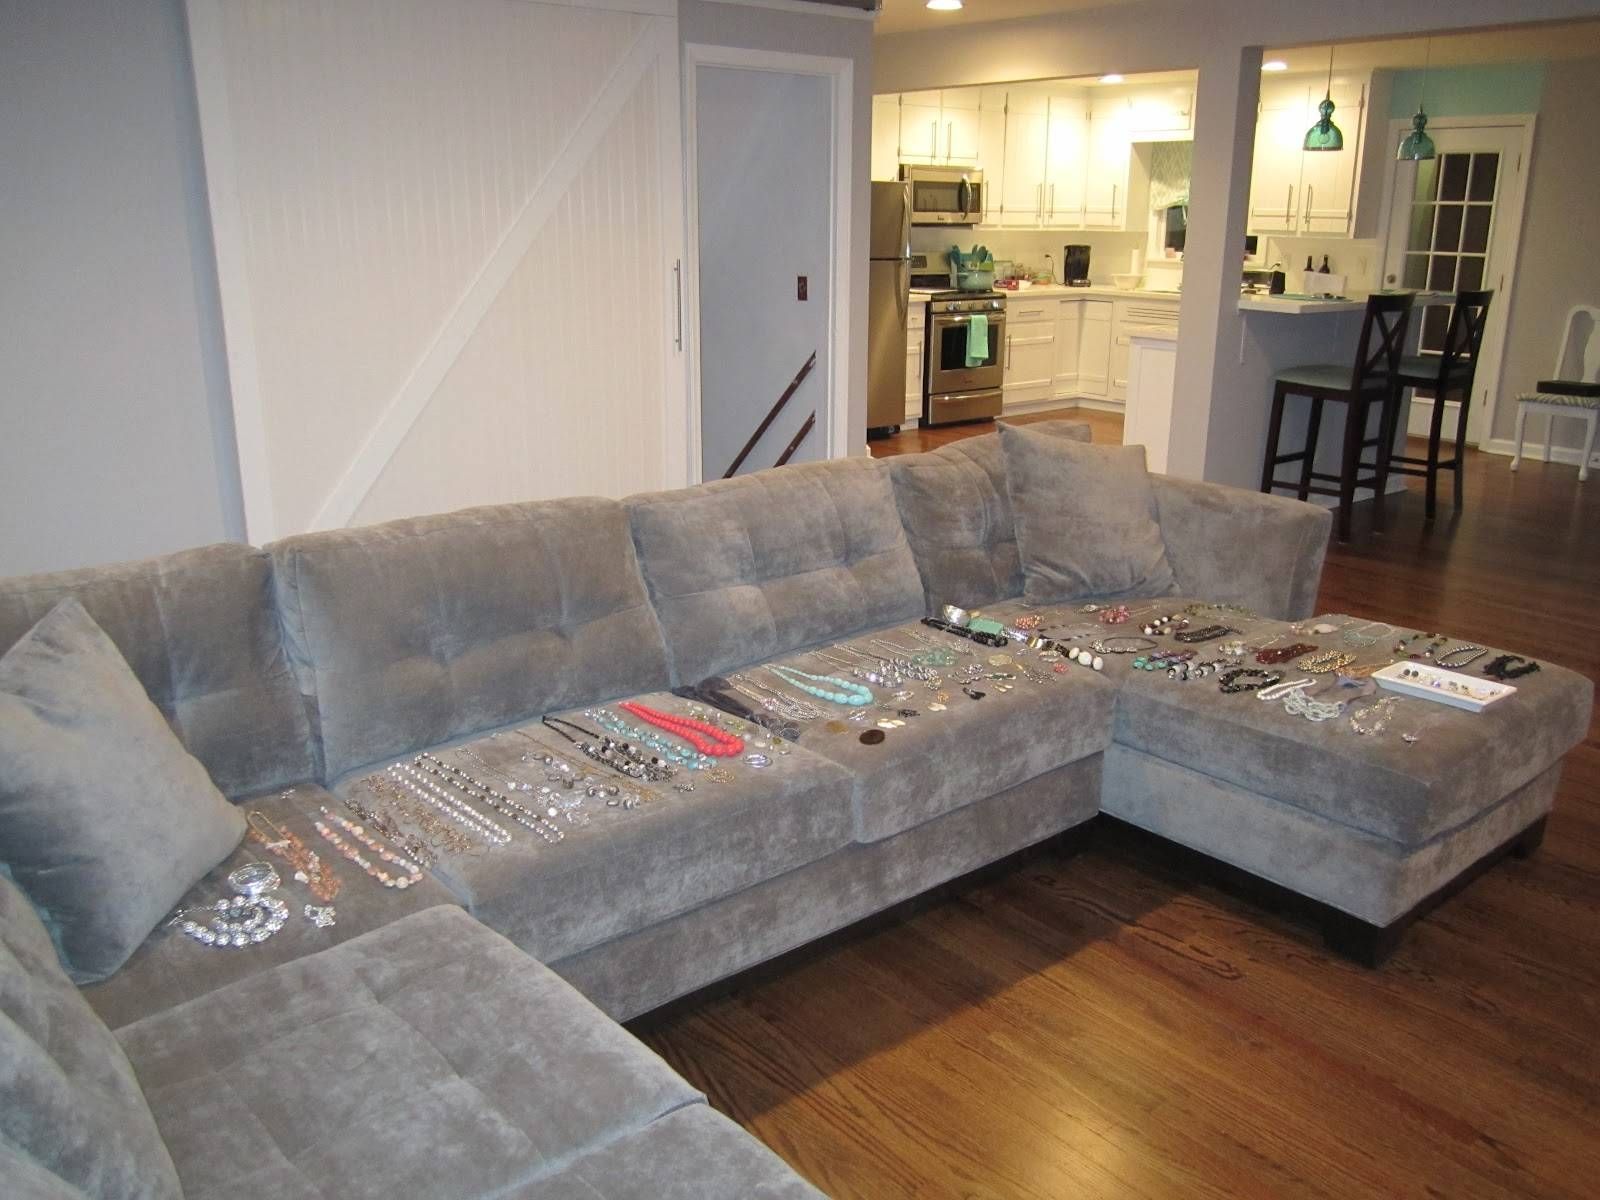 Retro Ranch Reno: What To Do, What To Do Intended For Elliot Sectional Sofas (View 12 of 15)